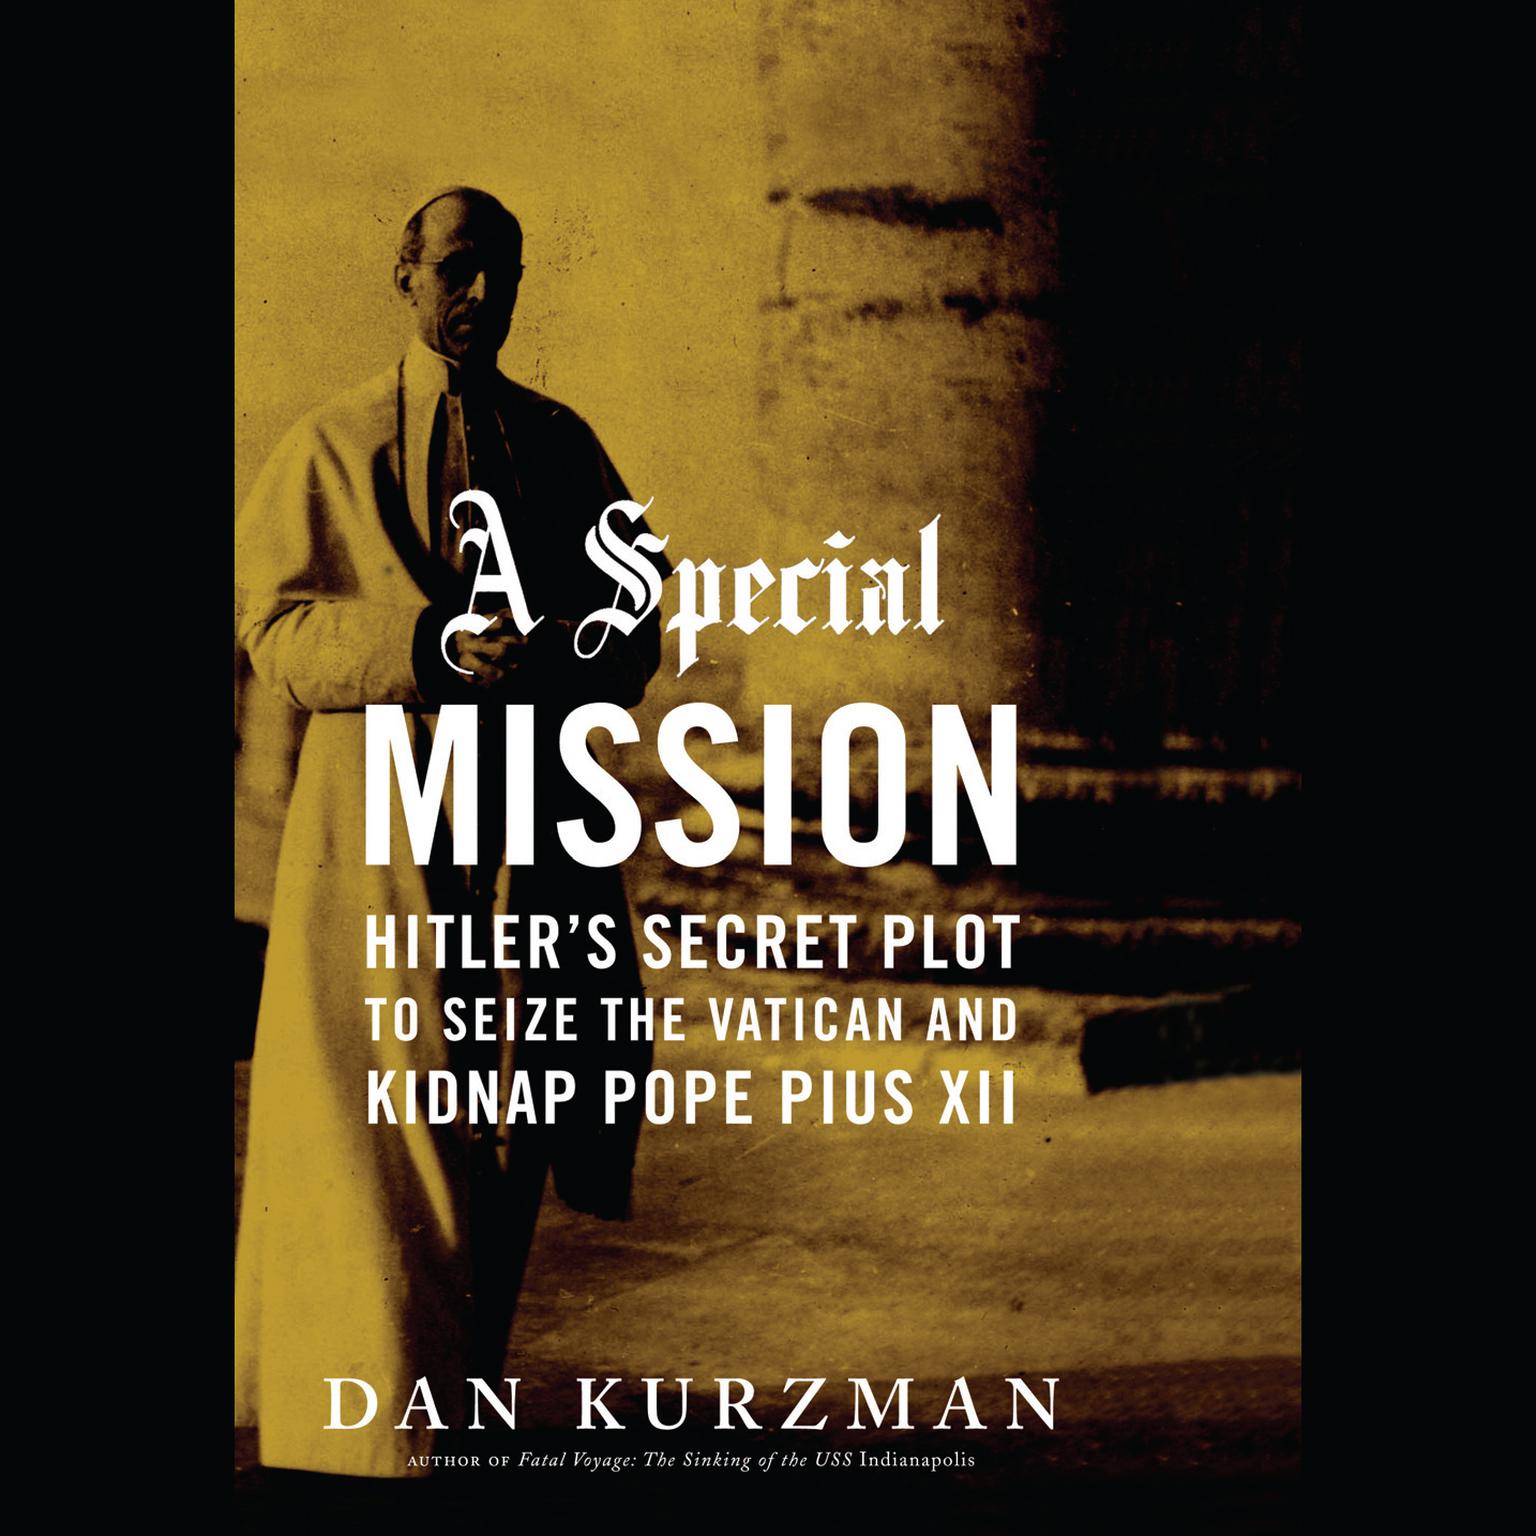 A Special Mission: Hitler’s Secret Plot to Seize the Vatican and Kidnap Pope Pius XII Audiobook, by Dan Kurzman